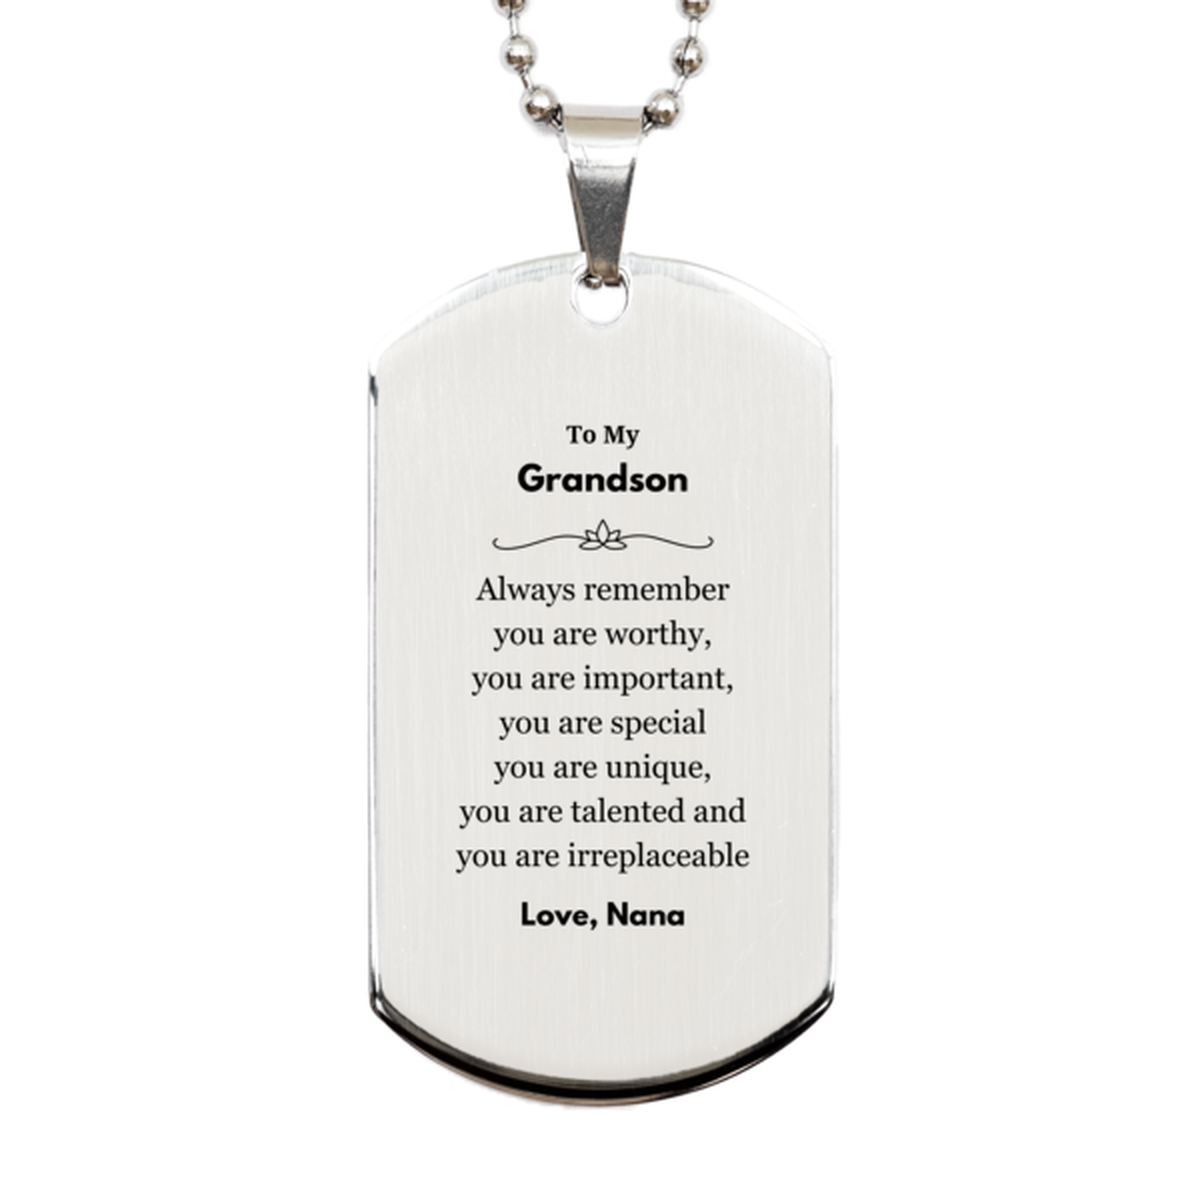 Grandson Birthday Gifts from Nana, Inspirational Silver Dog Tag for Grandson Christmas Graduation Gifts for Grandson Always remember you are worthy, you are important. Love, Nana